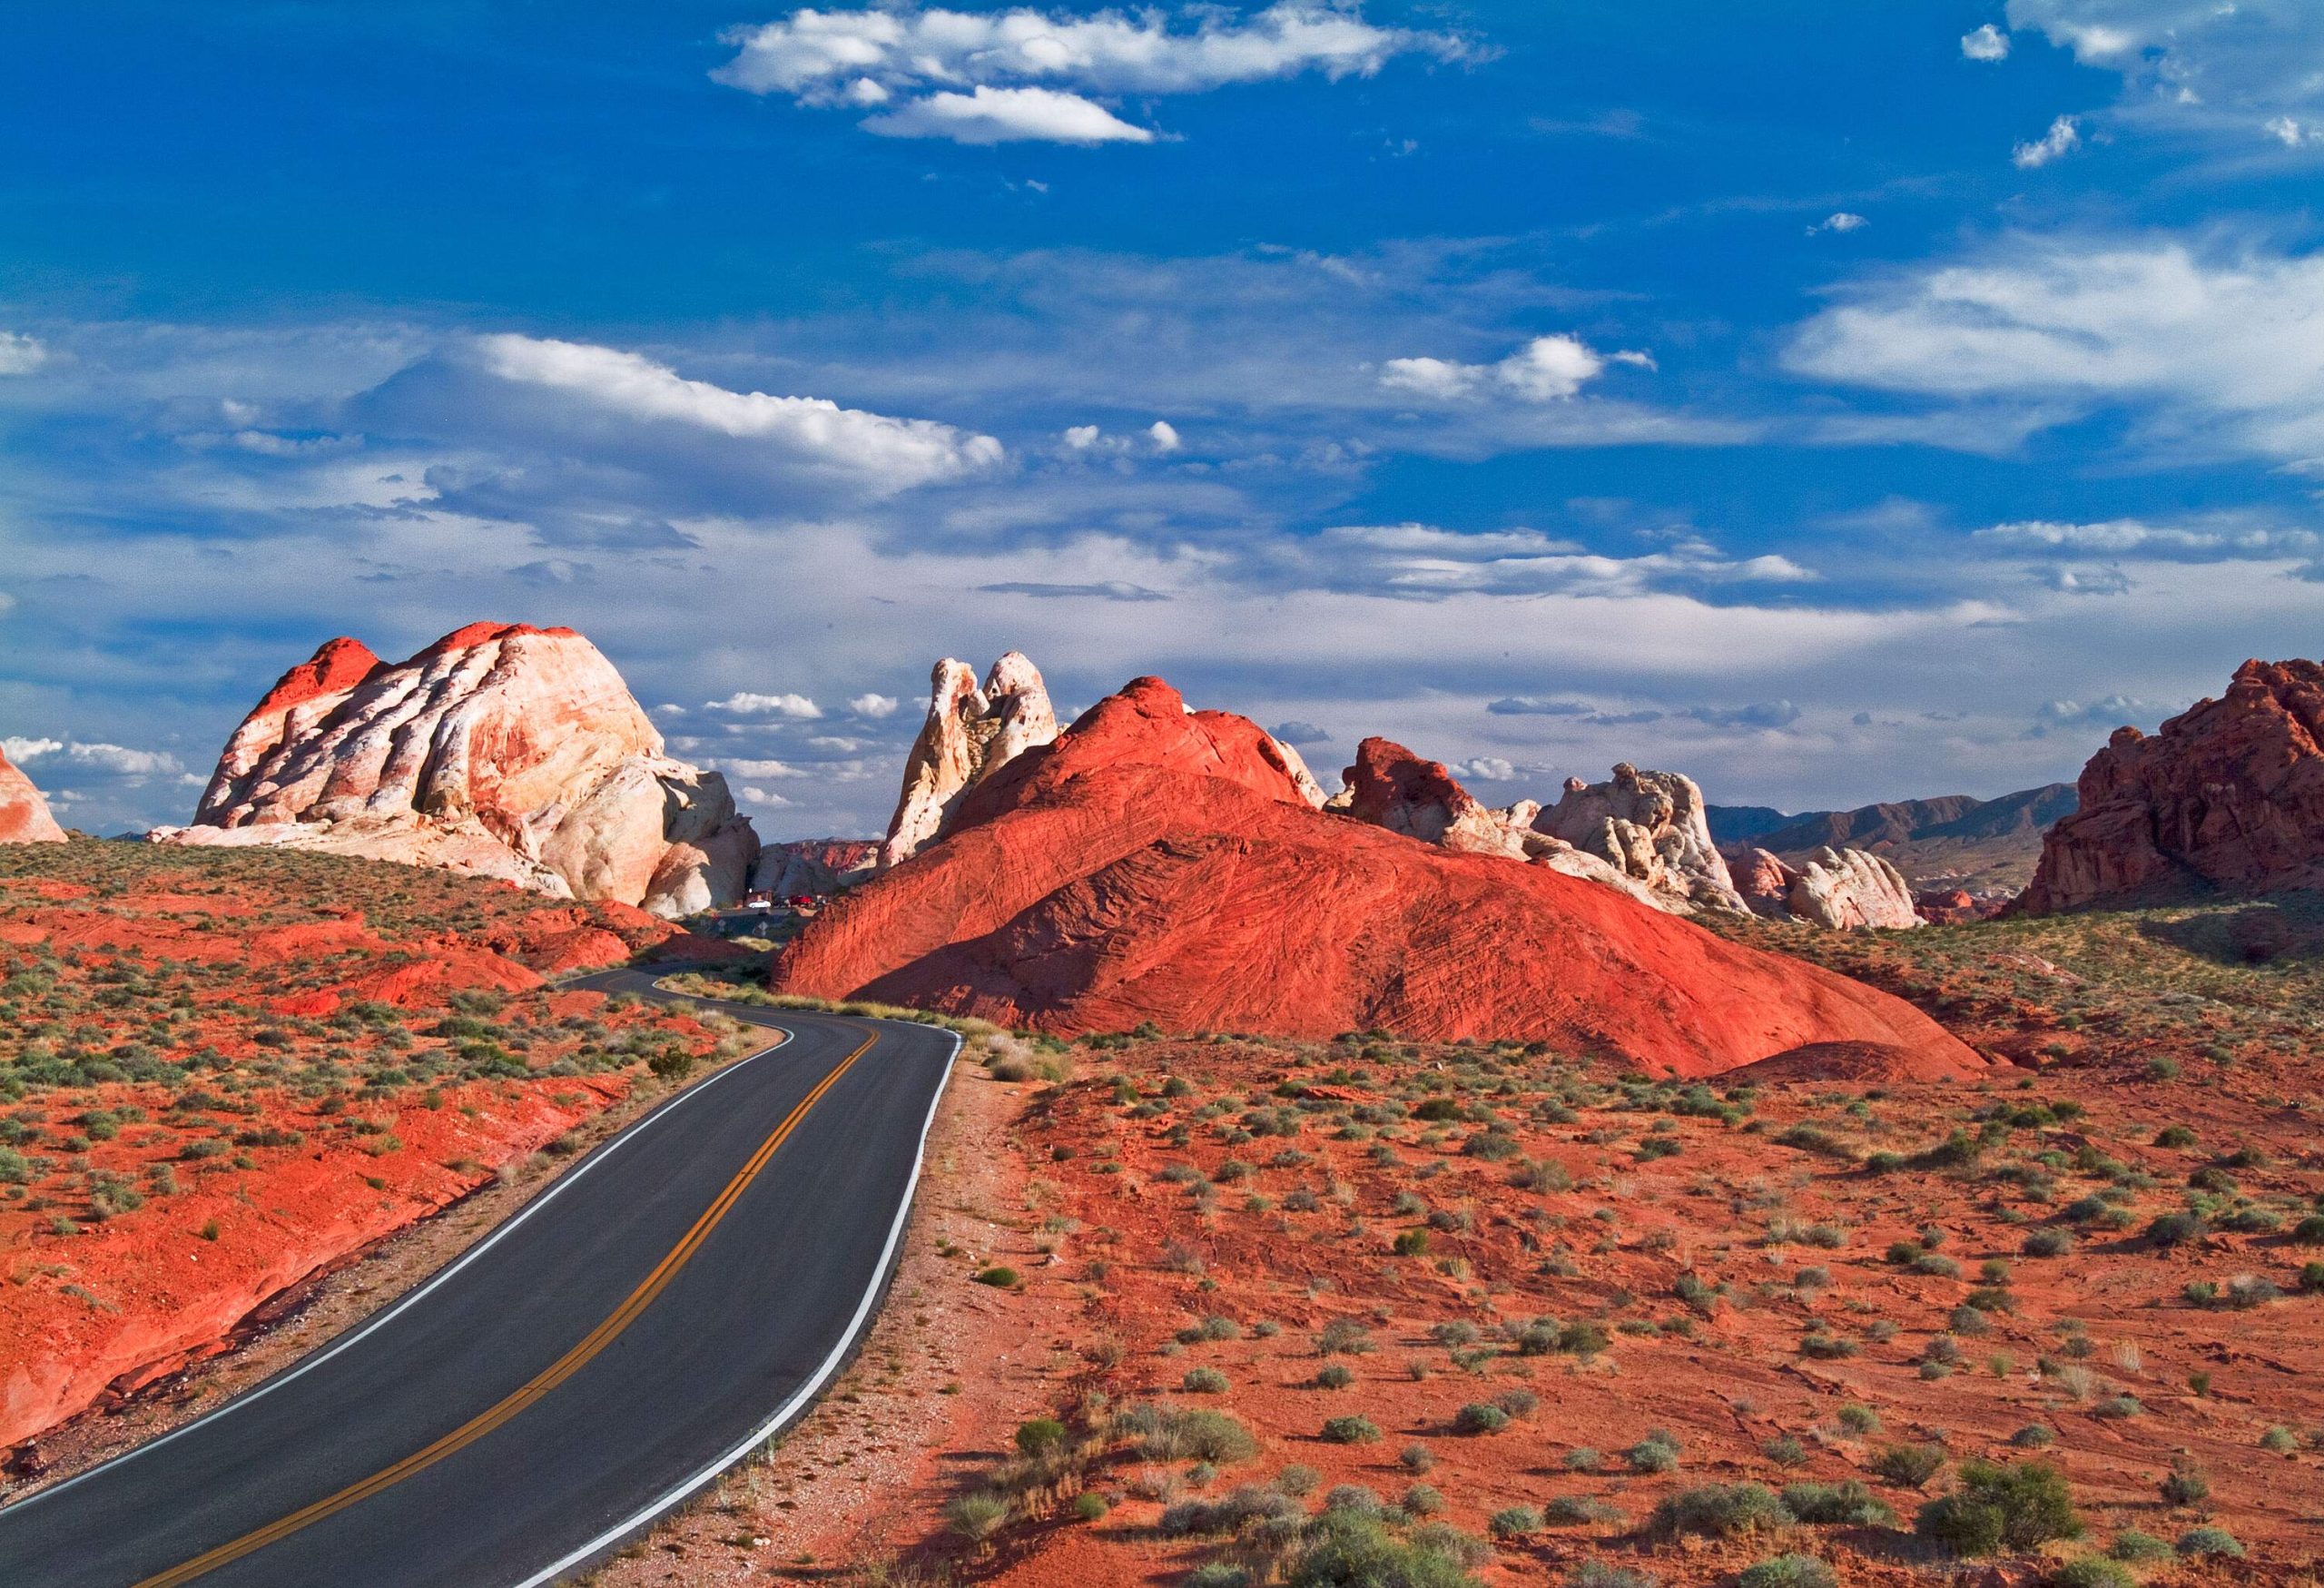 An empty asphalt road meandering on a stunning red rugged valley under a dramatic sky.